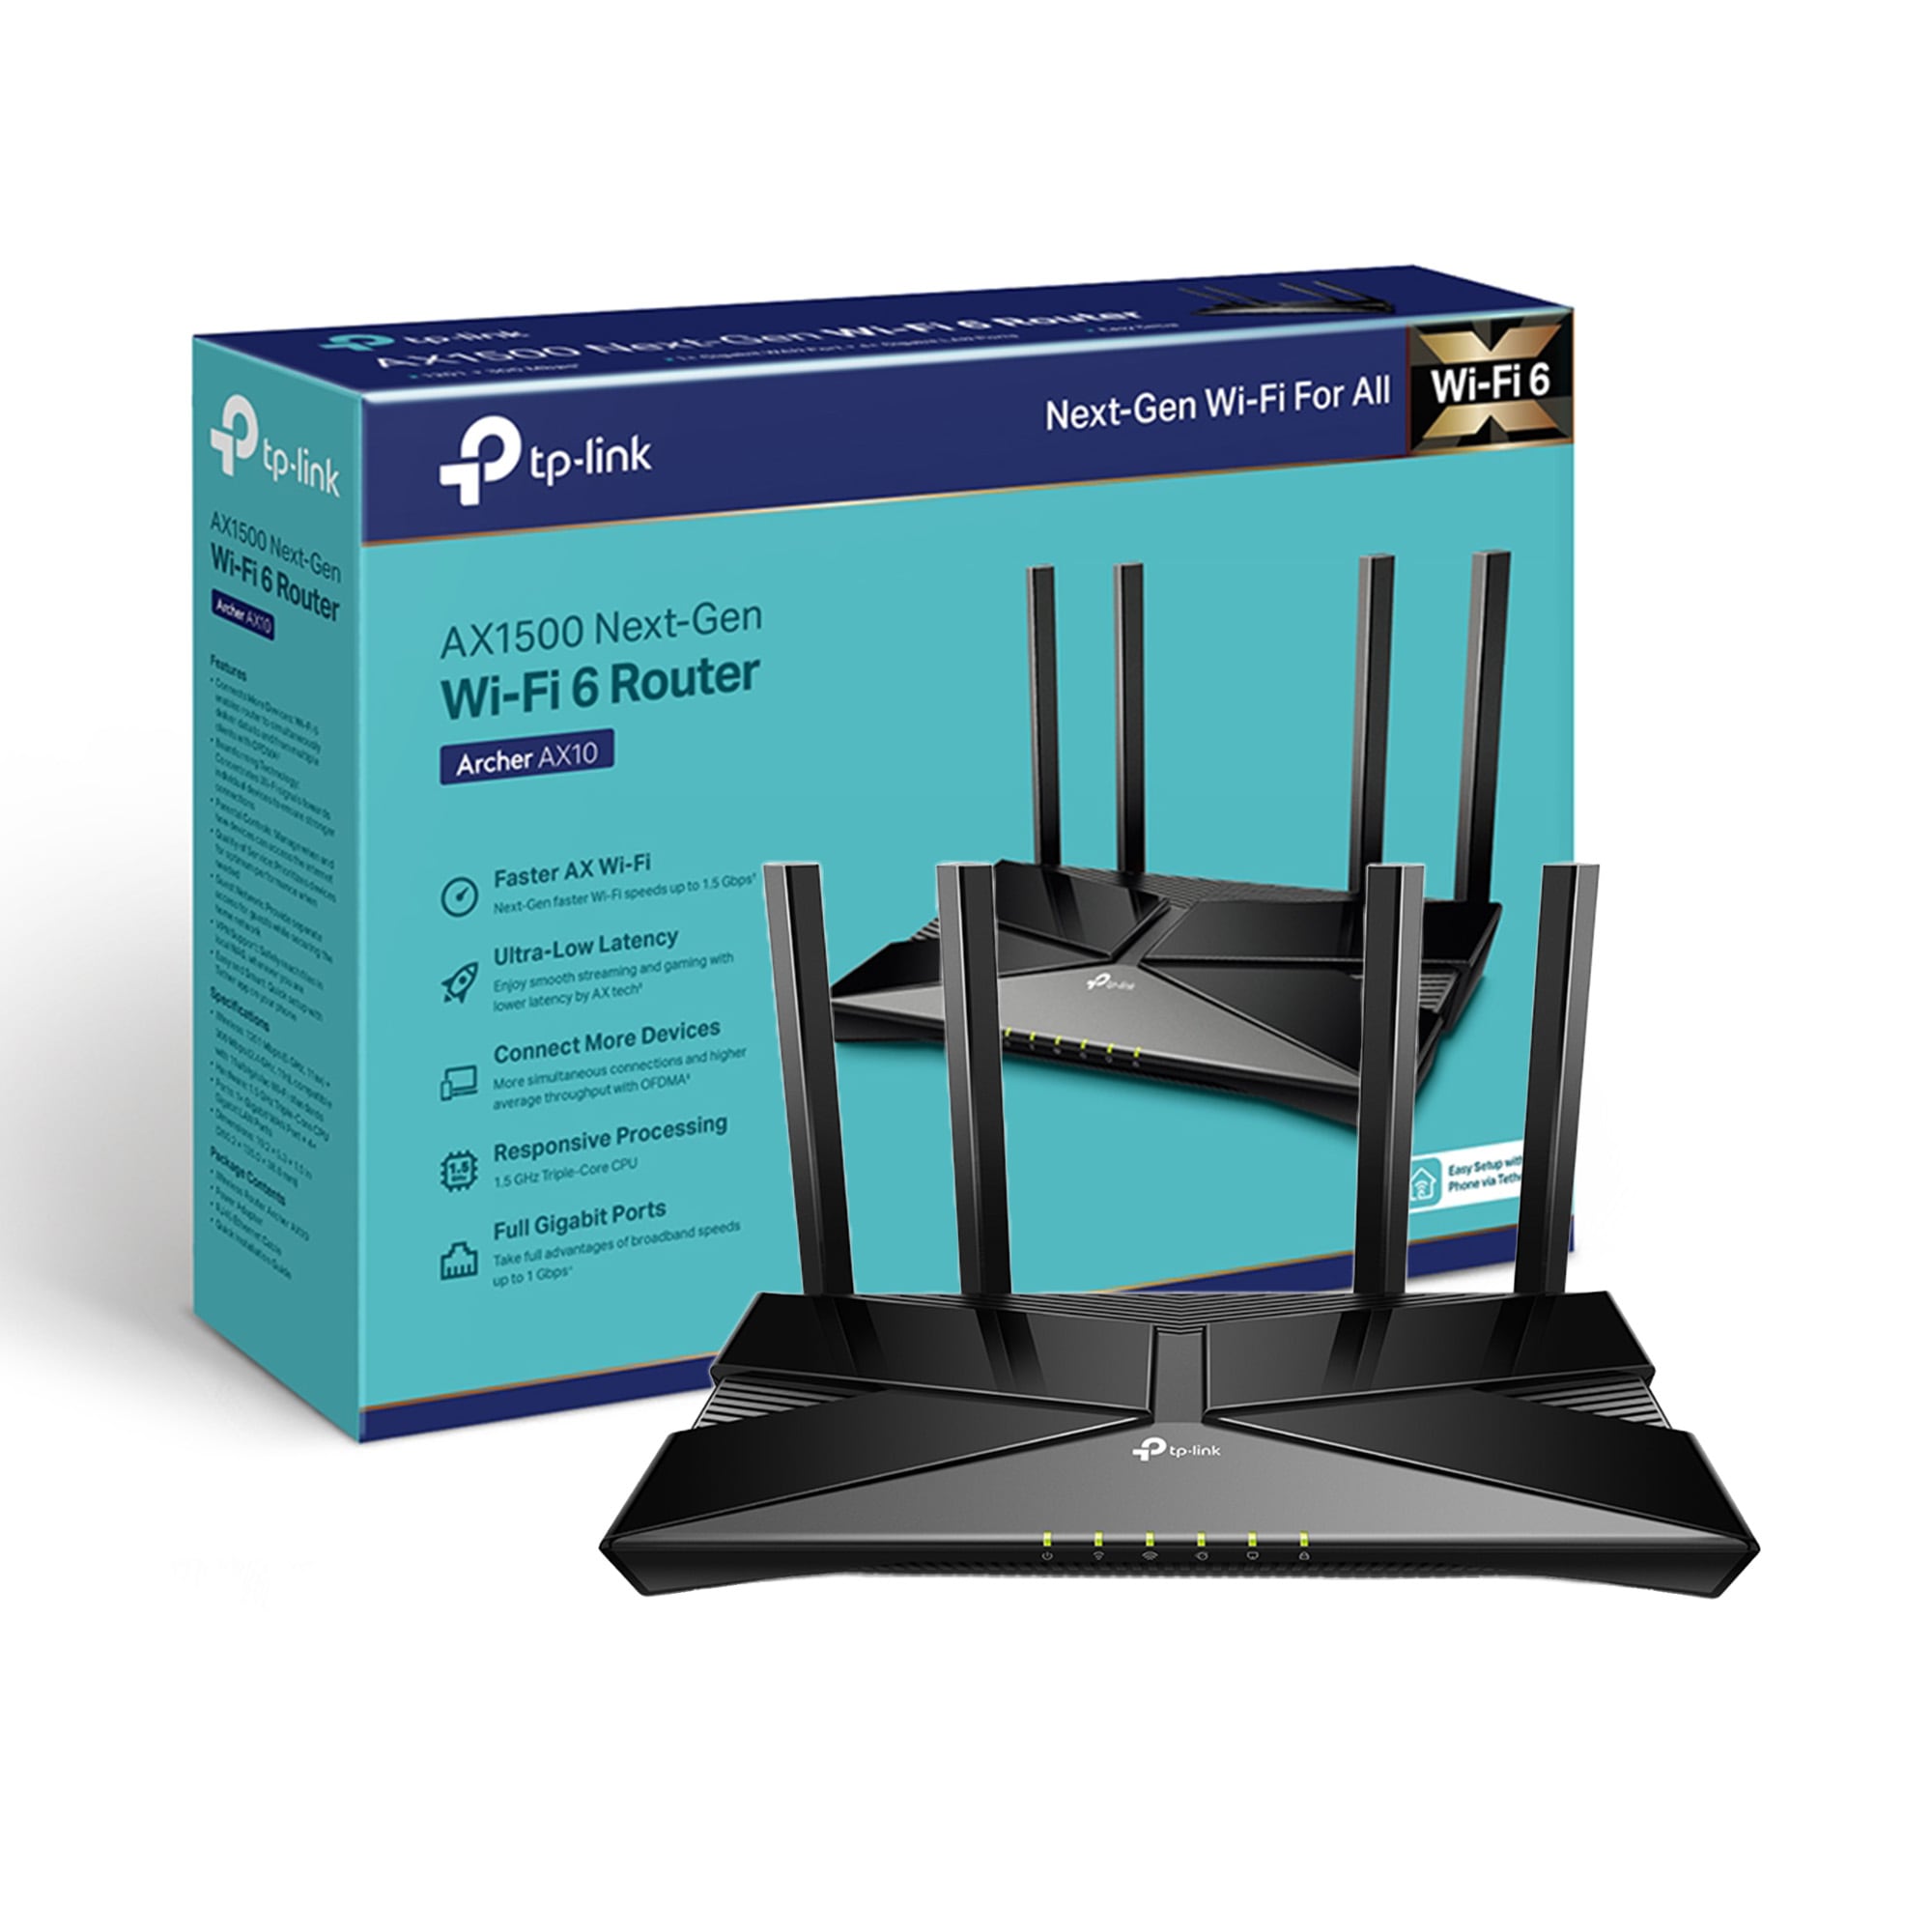 TP-Link Smart WiFi 6 Router (Archer AX10) – 802.11ax Router, 4 Gigabit LAN  Ports, Dual Band AX Router,Beamforming,OFDMA, MU-MIMO, Parental Controls